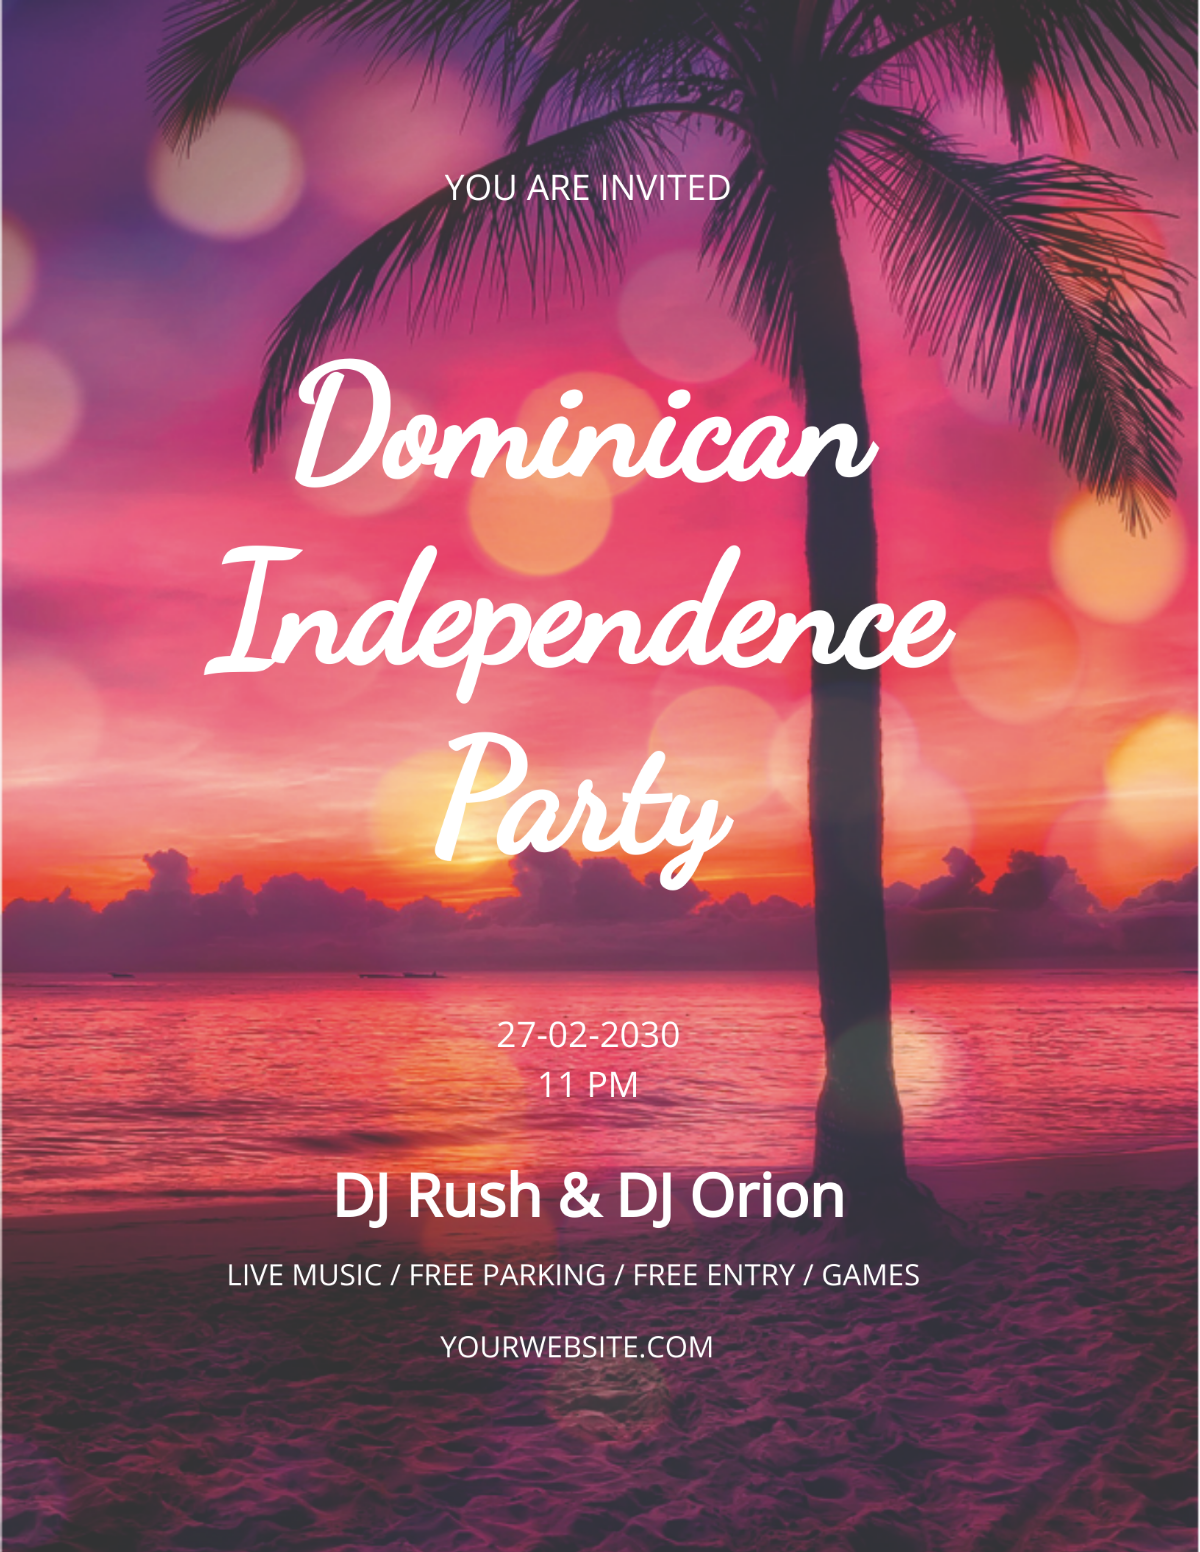 Dominican Independence Party Flyer